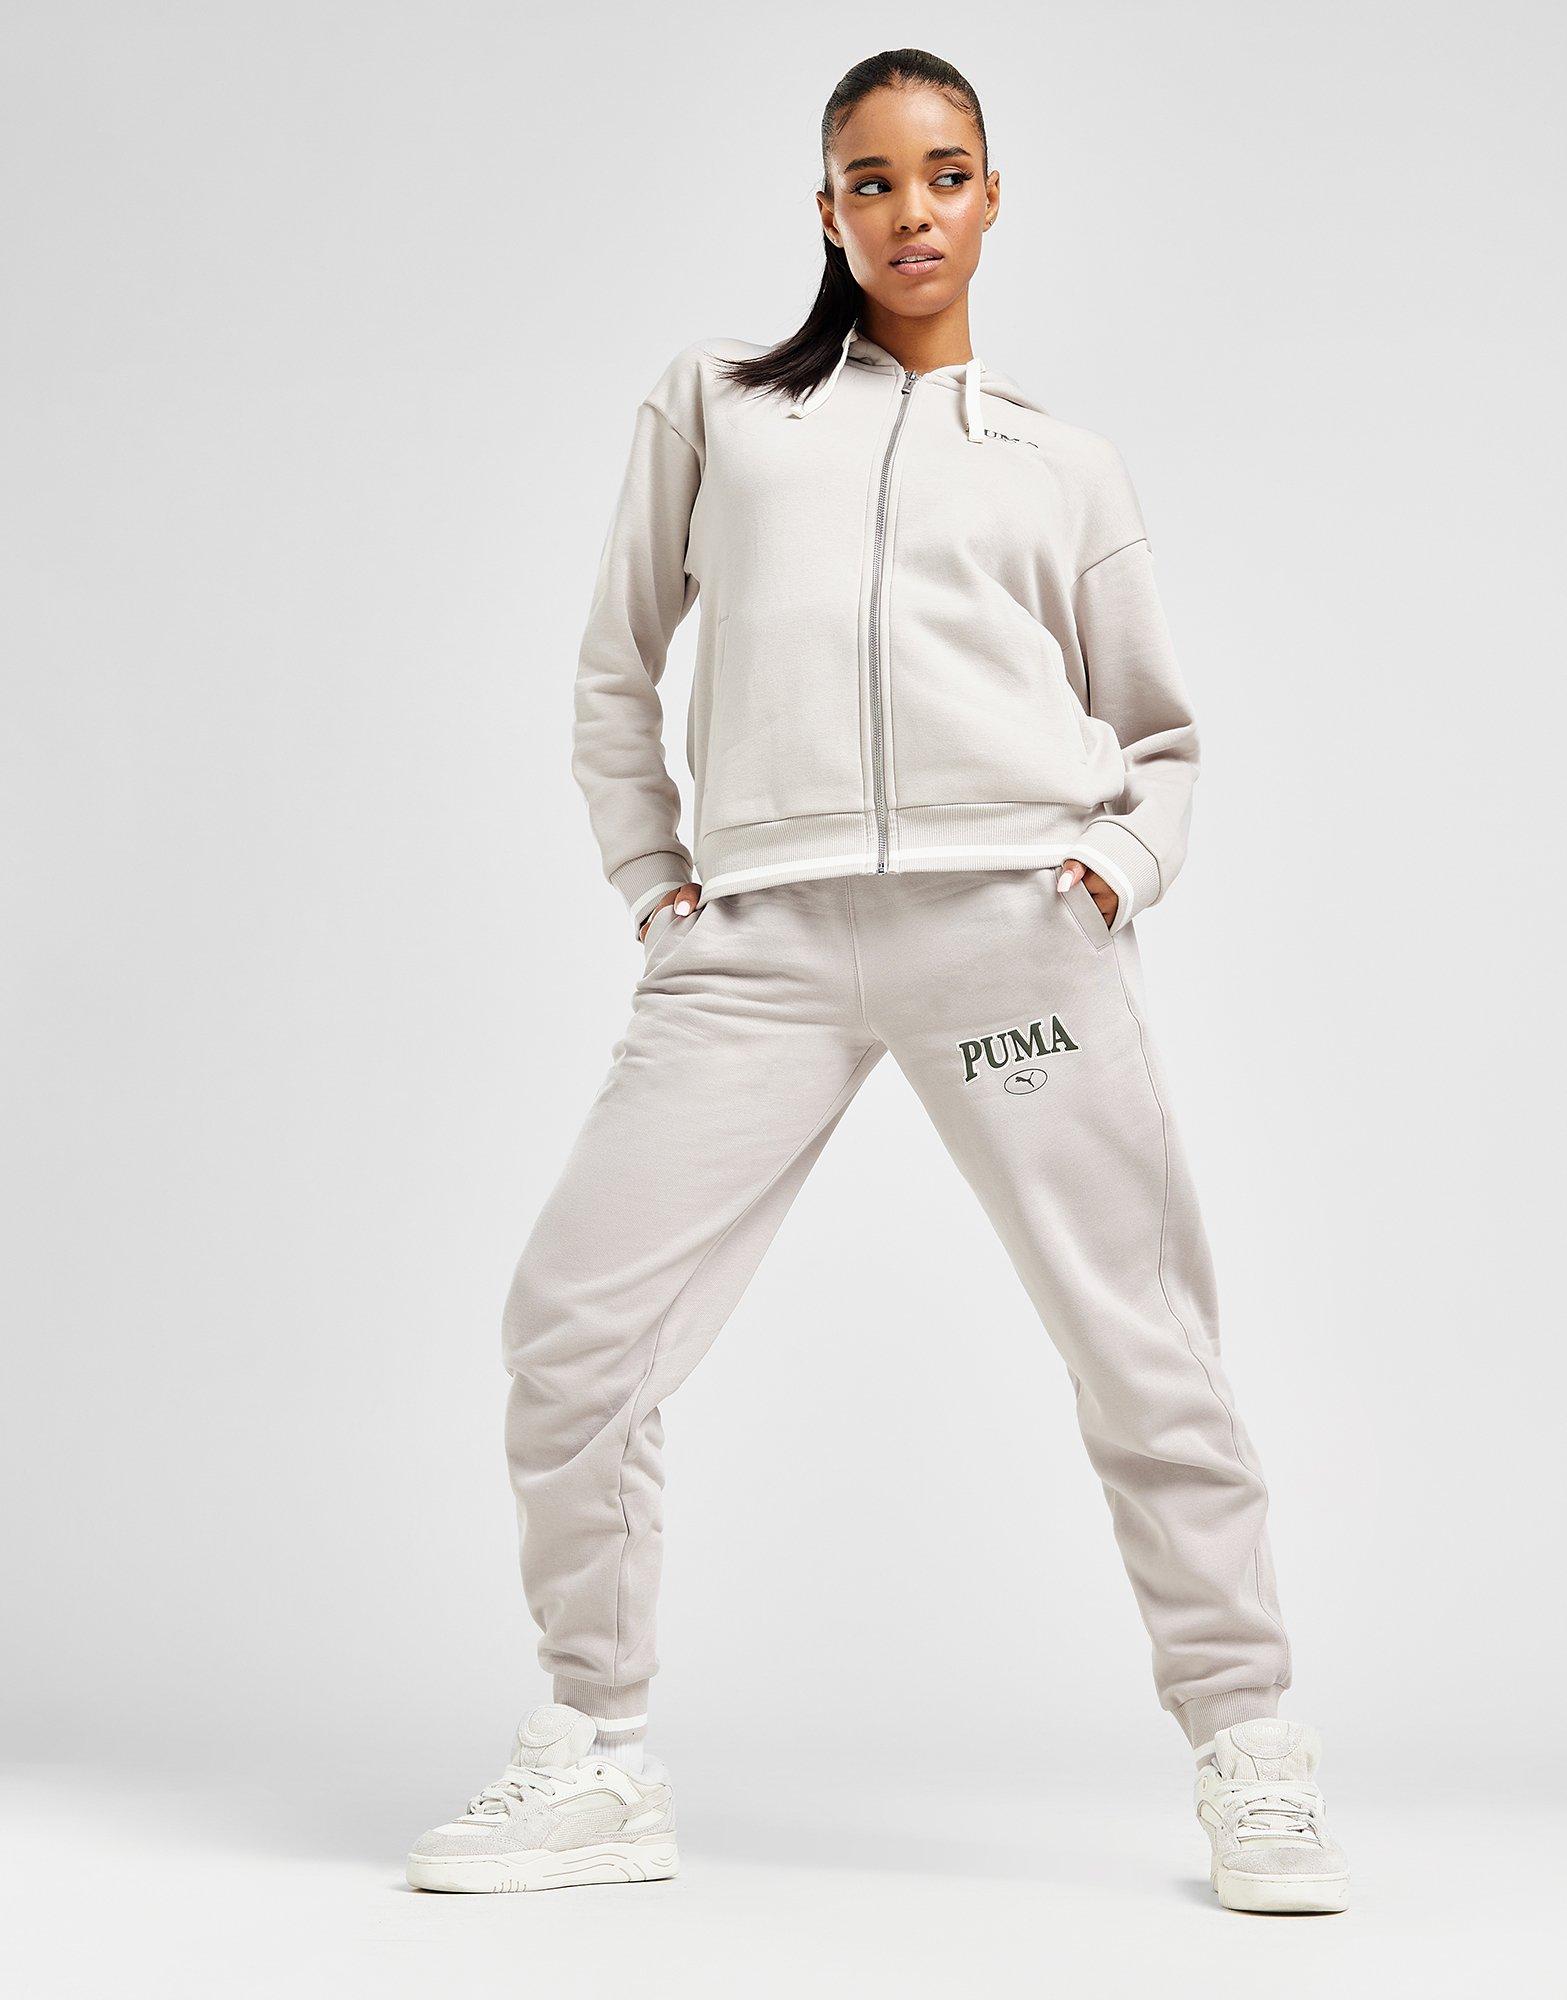 Clearance: WELL.DER.NESS™ Energy Women's Joggers